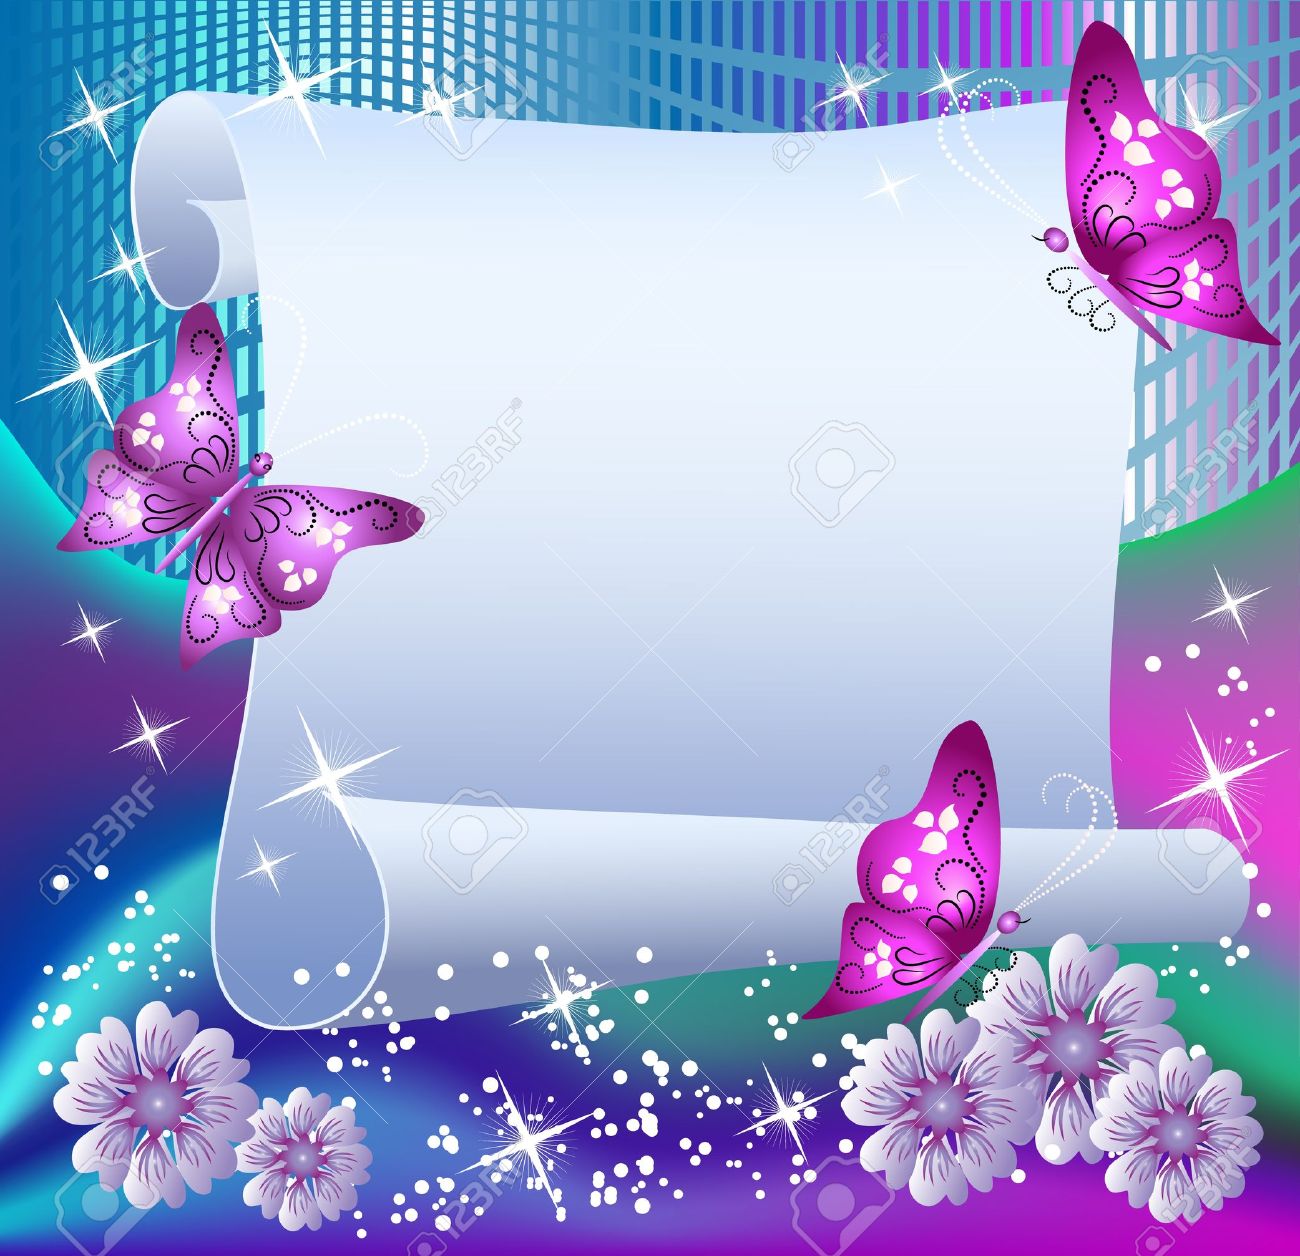 Magic Background With Paper Butterflies And A Place For Text